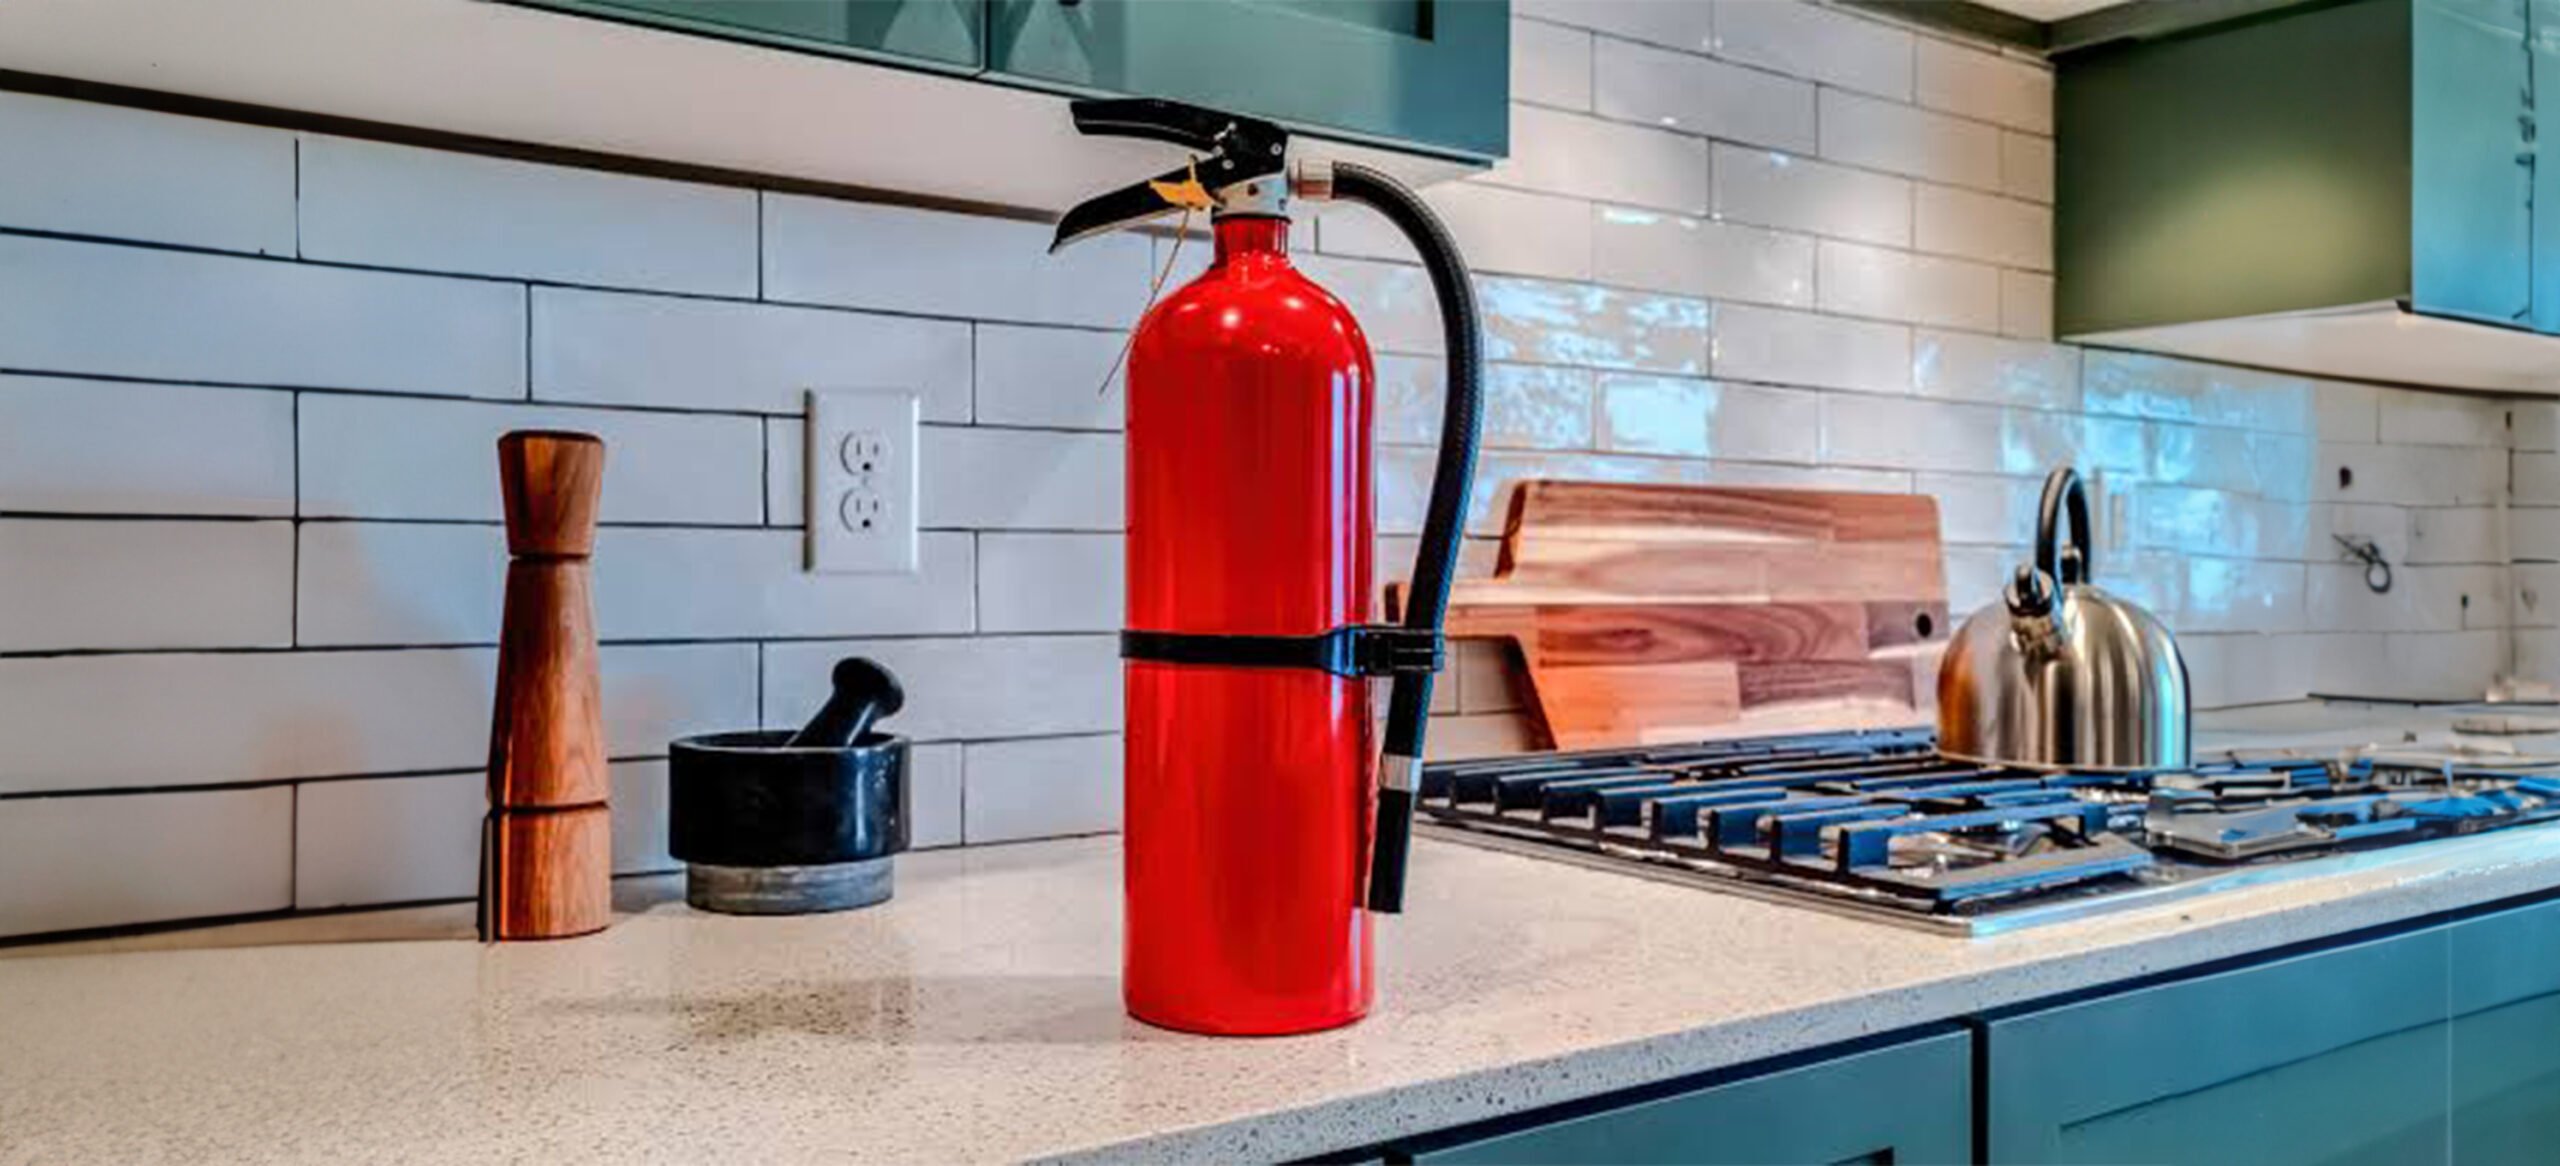 Fire Safety and Extinguishers